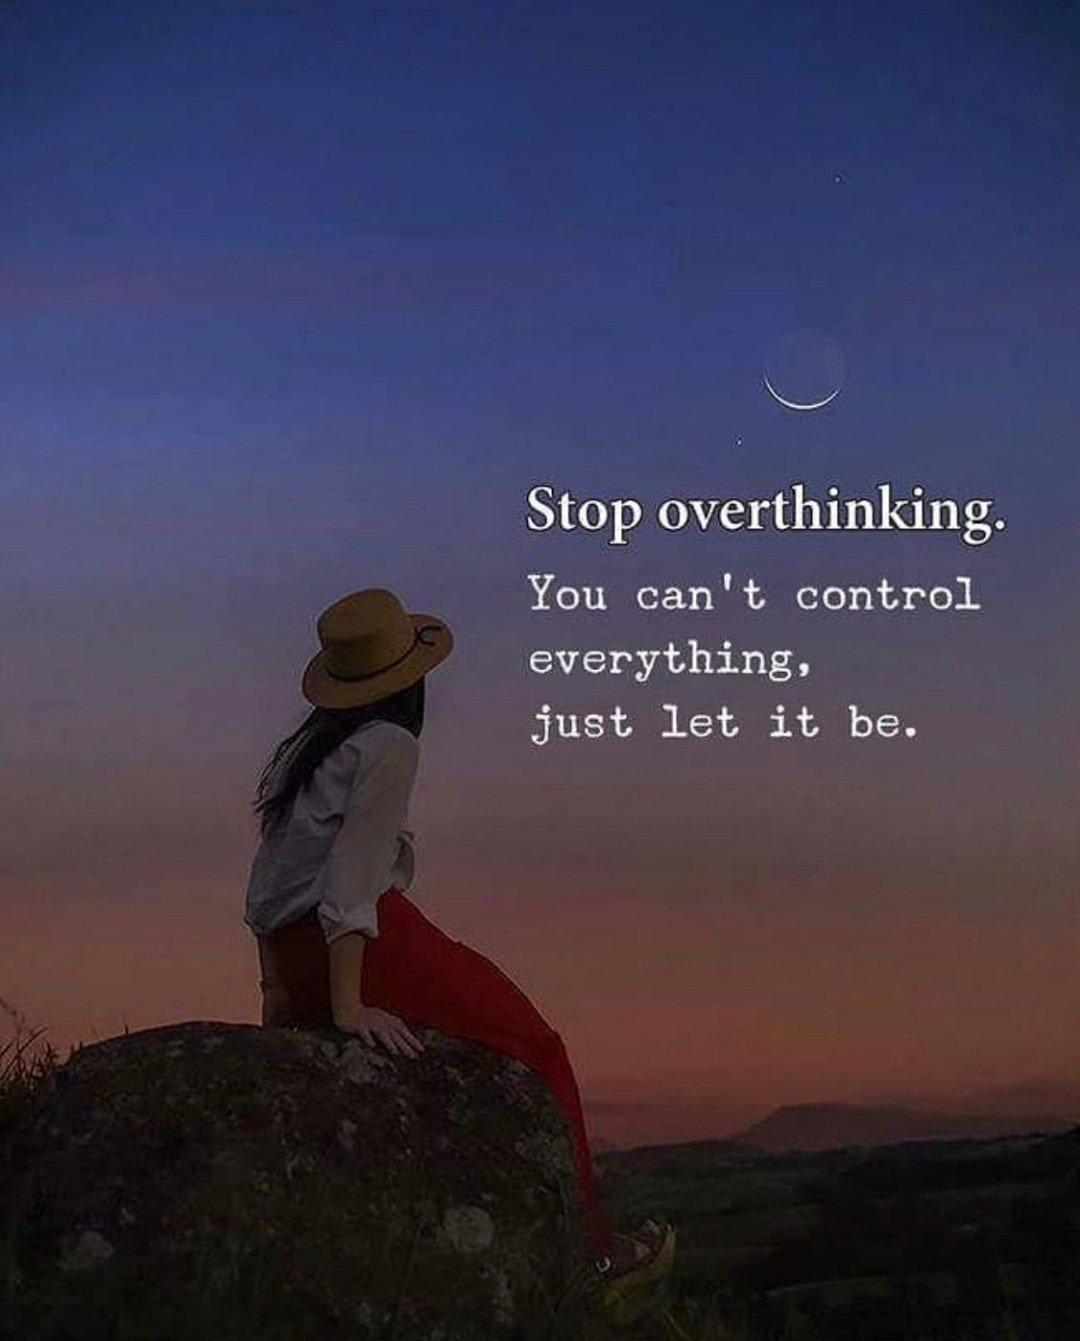 Stop overthinking. You can't control just let it be.